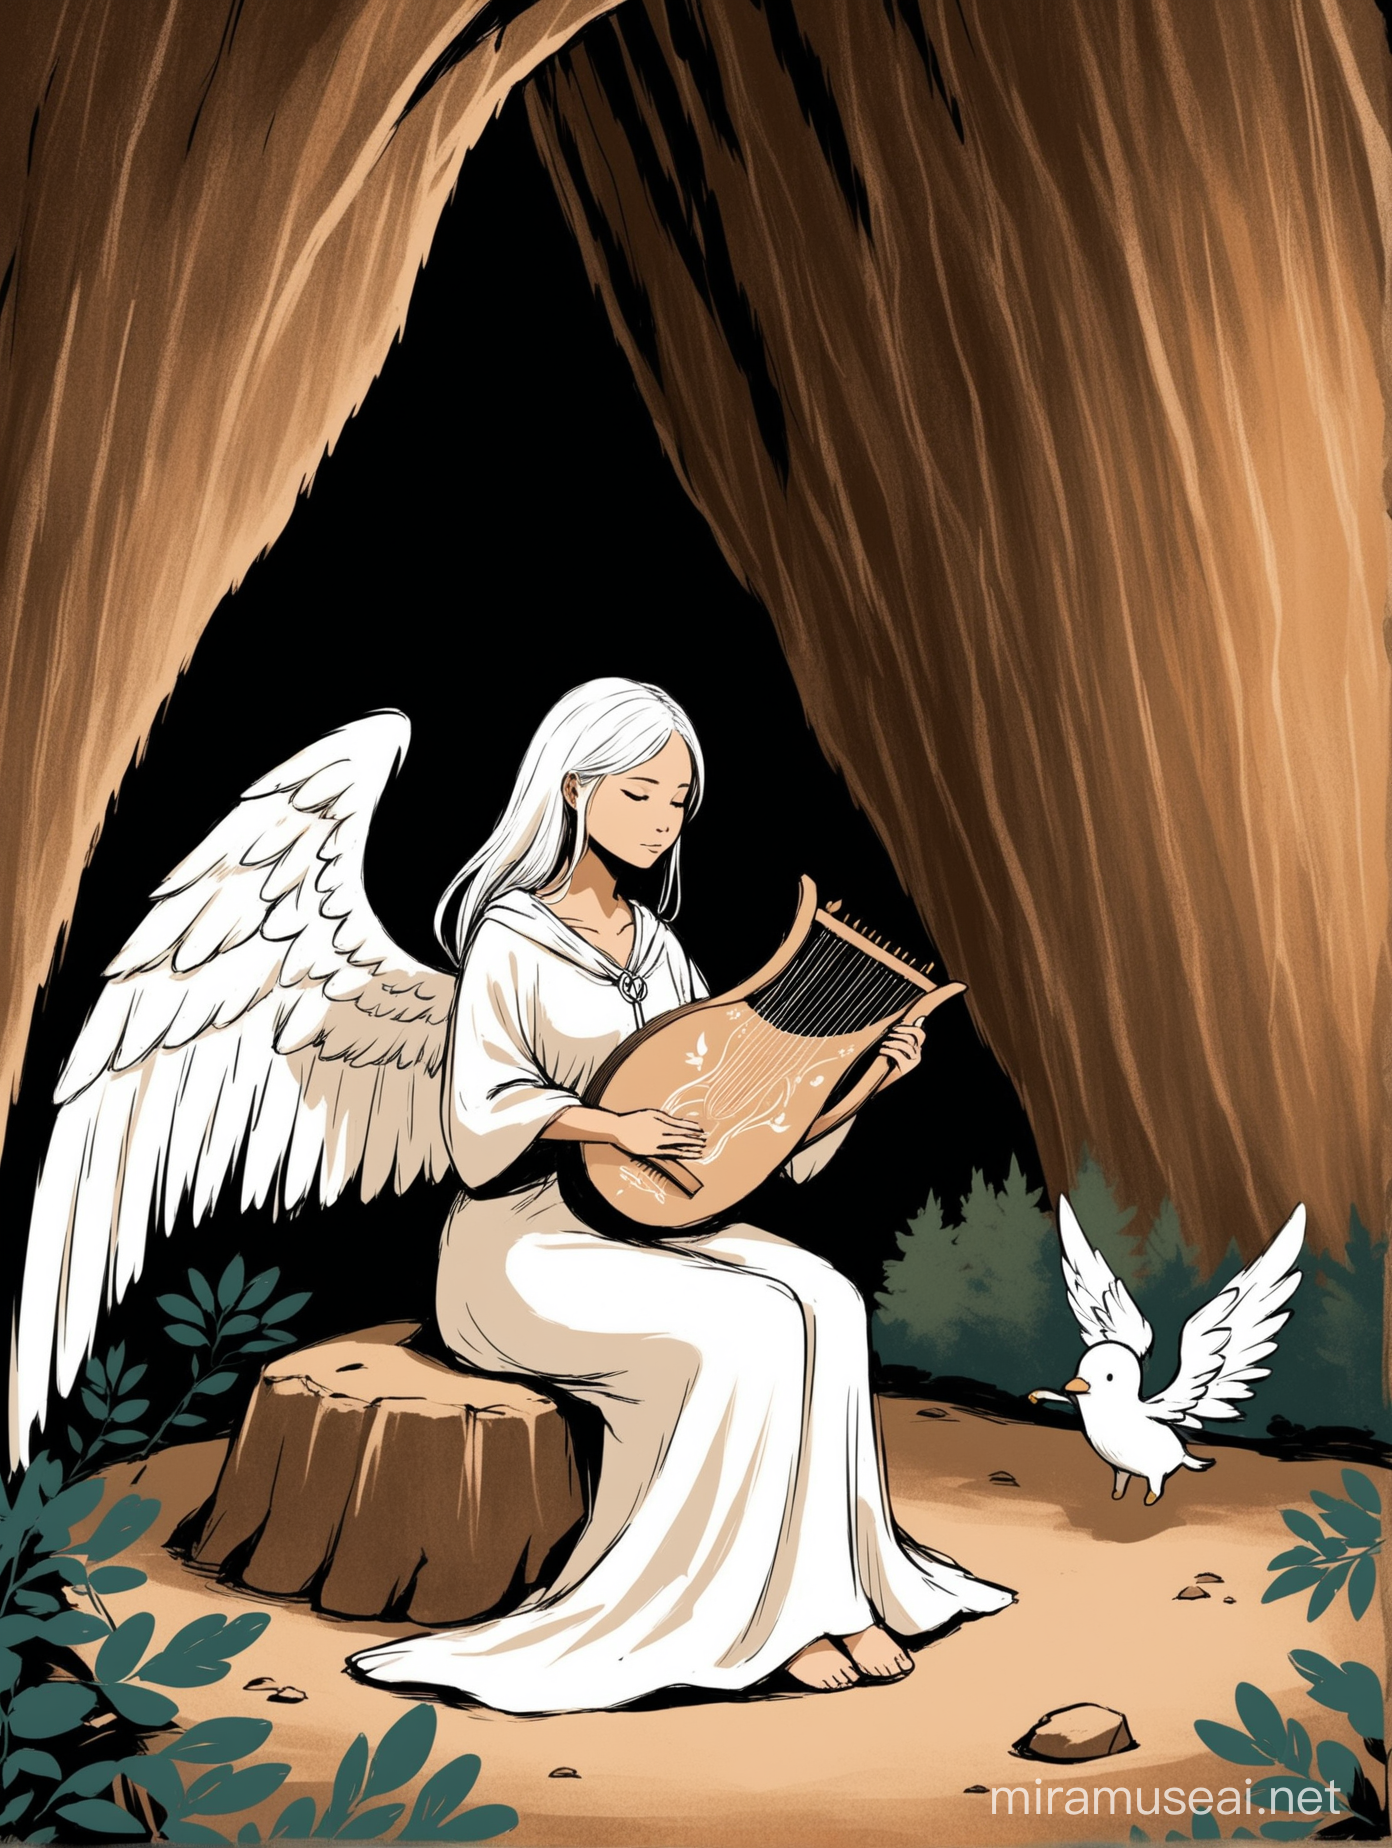 A woman with angel wings playing a lyre in a forest. This woman has a cloak on. This is a cave drawing. She has white hair. THIS IS A CAVE DRAWING. She is majestical